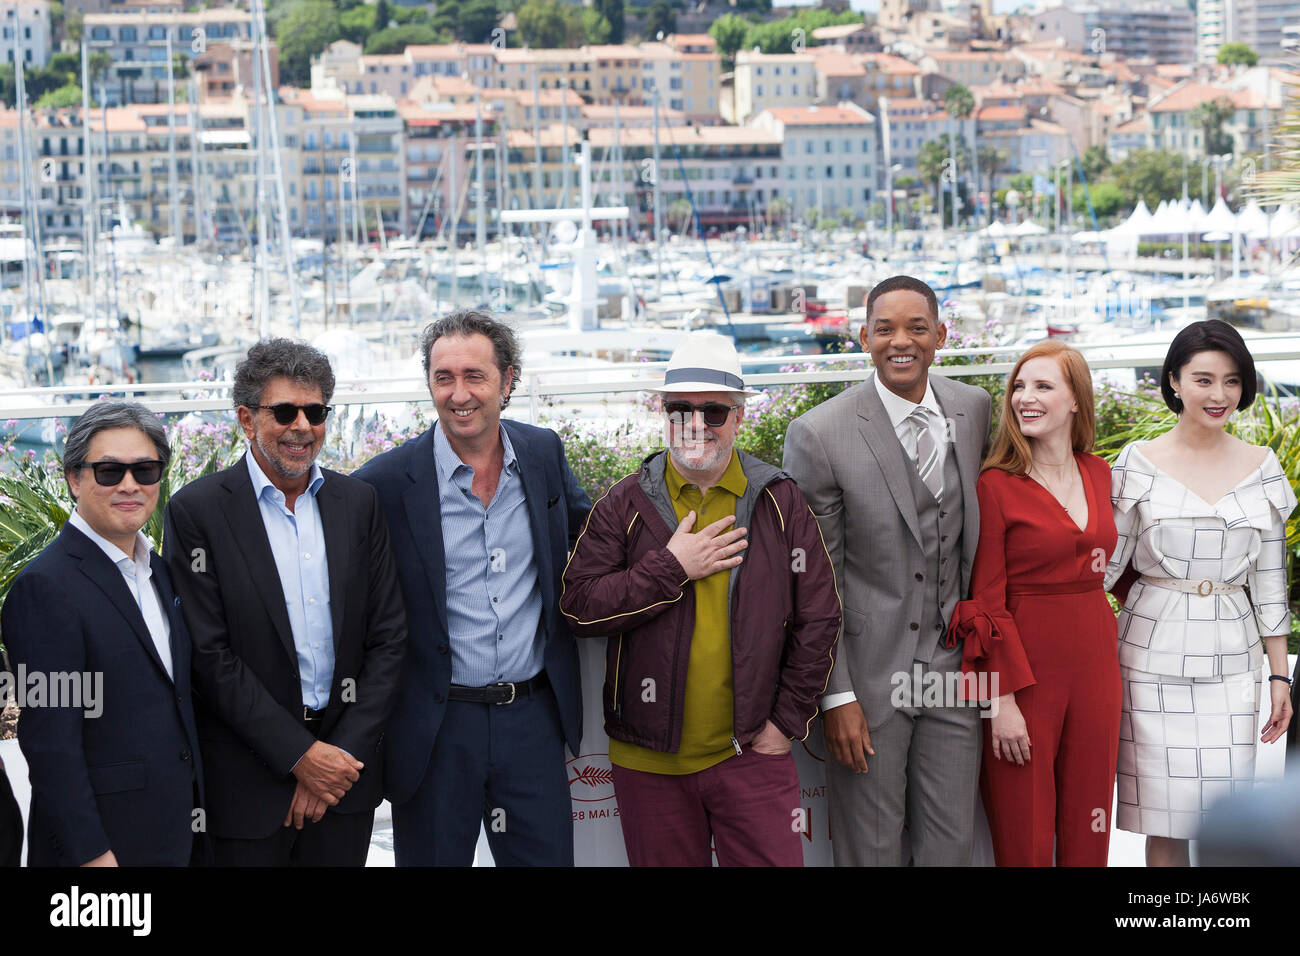 CANNES, FRANCE - MAY 17: Titre: Director Park Chan-Wook, Gabriel Yared, Director Paolo Sorrentino, director Pedro Amoldovar, actor Will Smith, actress Jessica Chastain, actress Fan Bingbing attends the Jury photocall during the 70th annual Cannes Film Festival at Palais des Festivals on May 17, 2017 in Cannes, France. Laurent Koffel/Alamy Live News Stock Photo